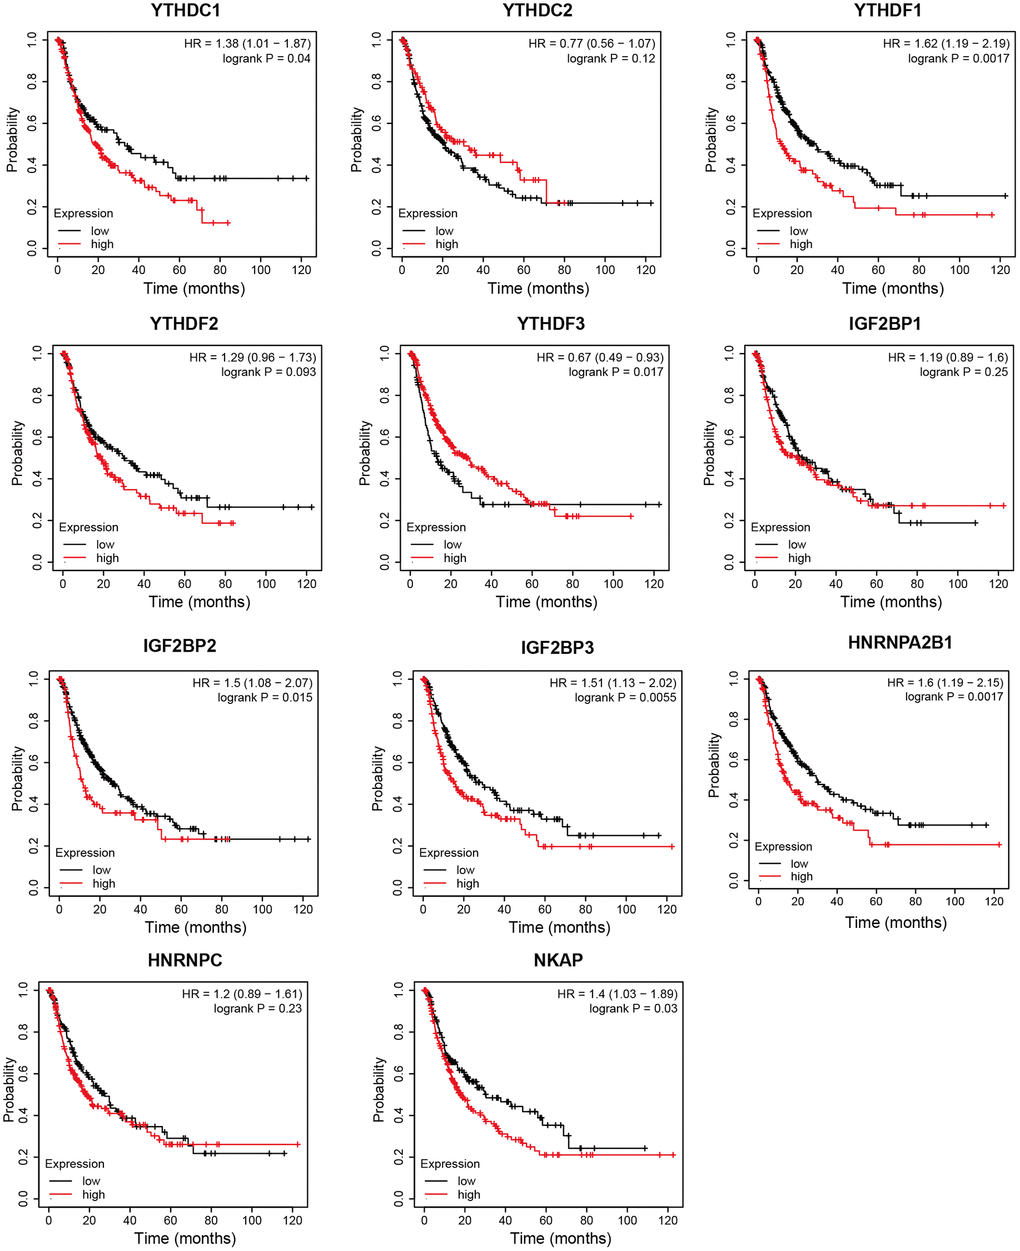 The progression free survival curve of m6A “readers” in HCC patients (Kaplan-Meier plotter database). YTHDC1, YTHDF1, IGF2BP2, IGF2BP3, HNRNPA2B1, and NKAP were negatively related with PFS time in HCC patients. YTHDF3 was positively related with PFS time in HCC patients.